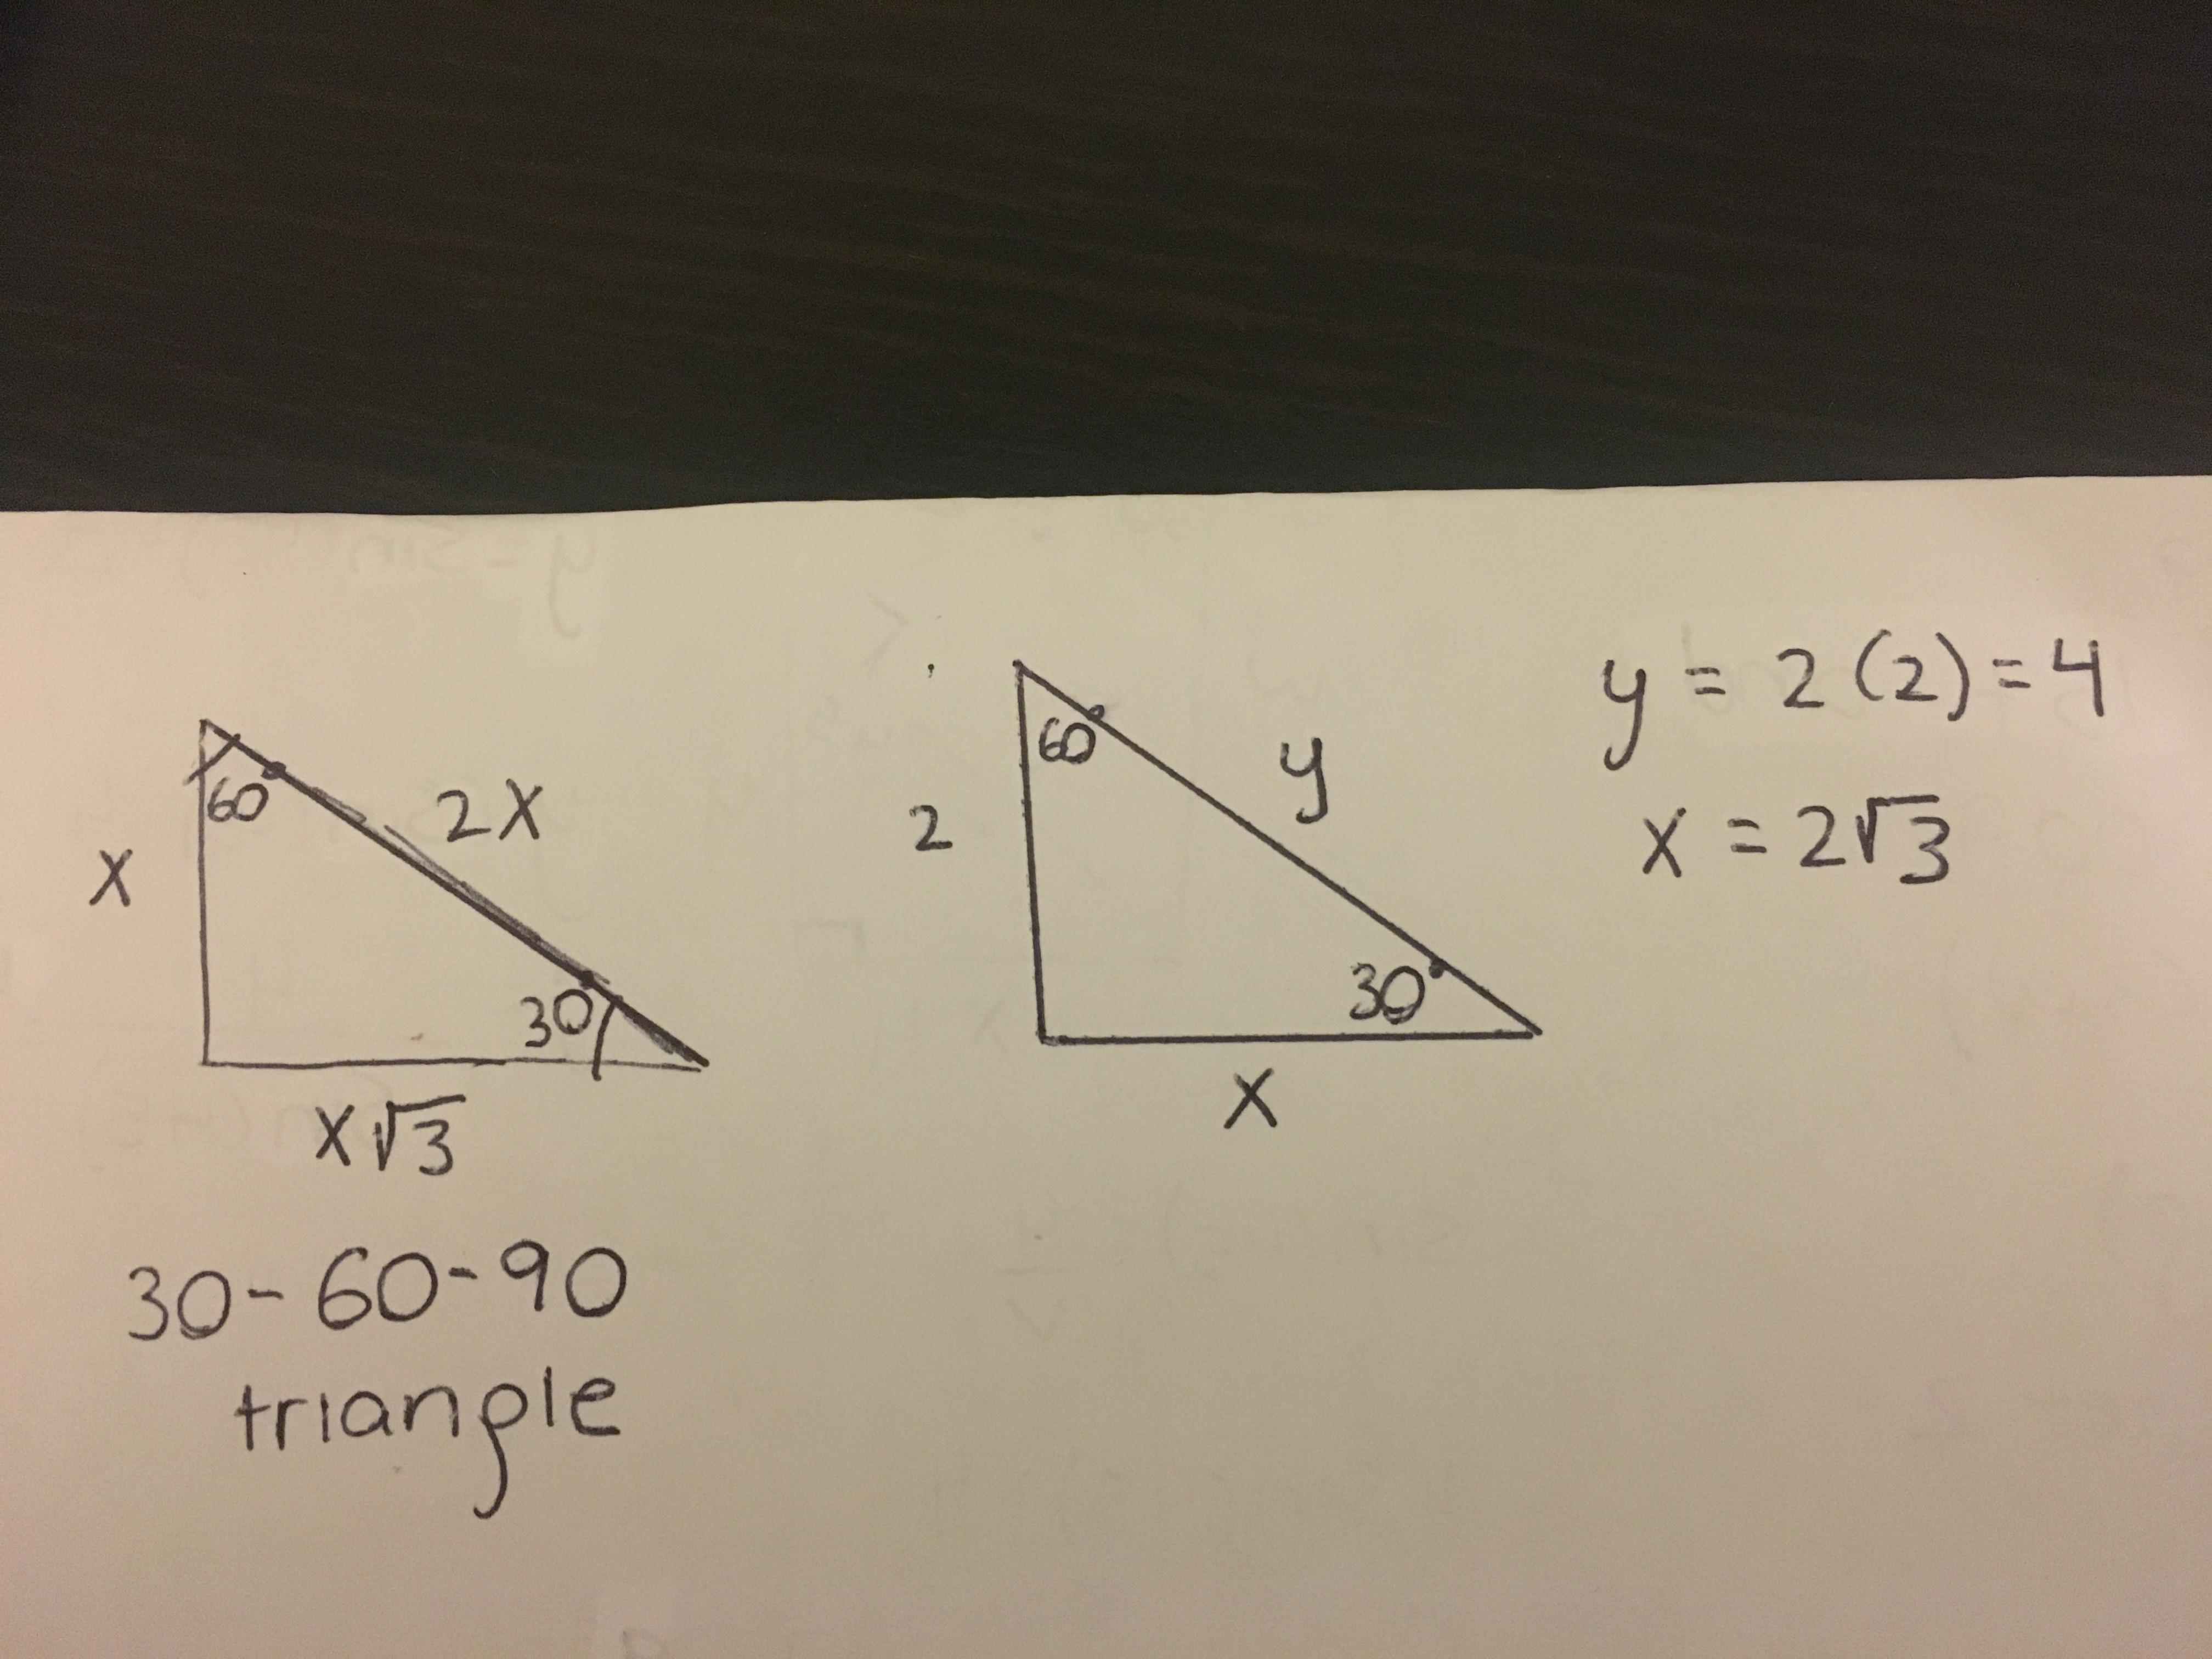 ASAP PLEASE HELP!!WILL GIVE BRAINEST!!!what Is The Value Of X And Y